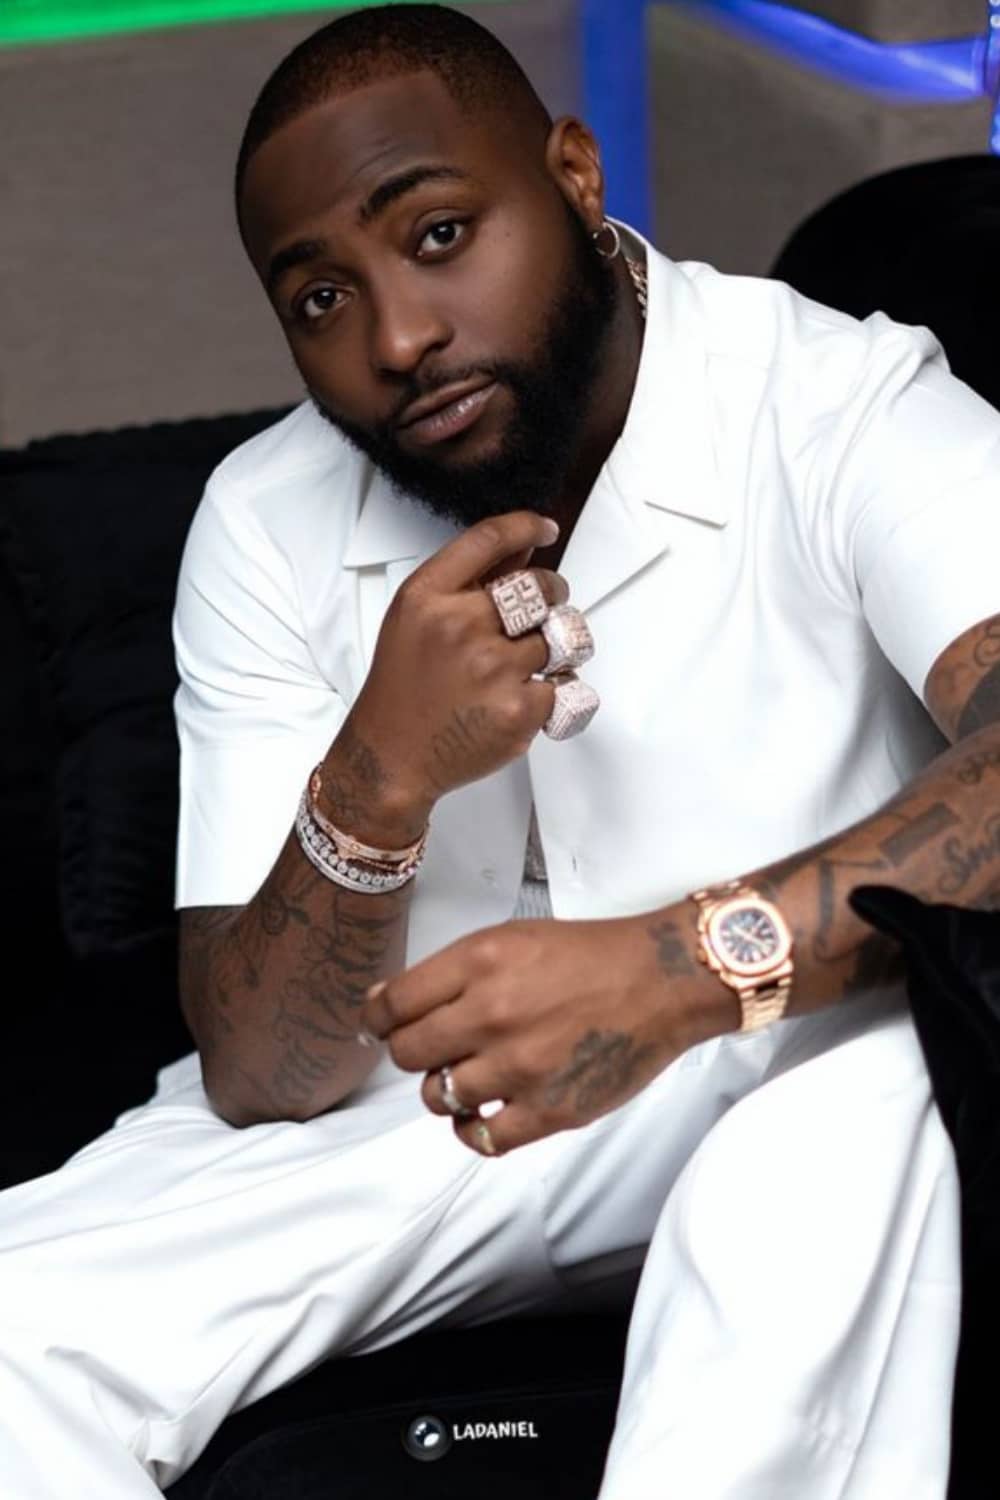 Davido marks difficult father's day following son's passing, expresses gratitude for god's strength